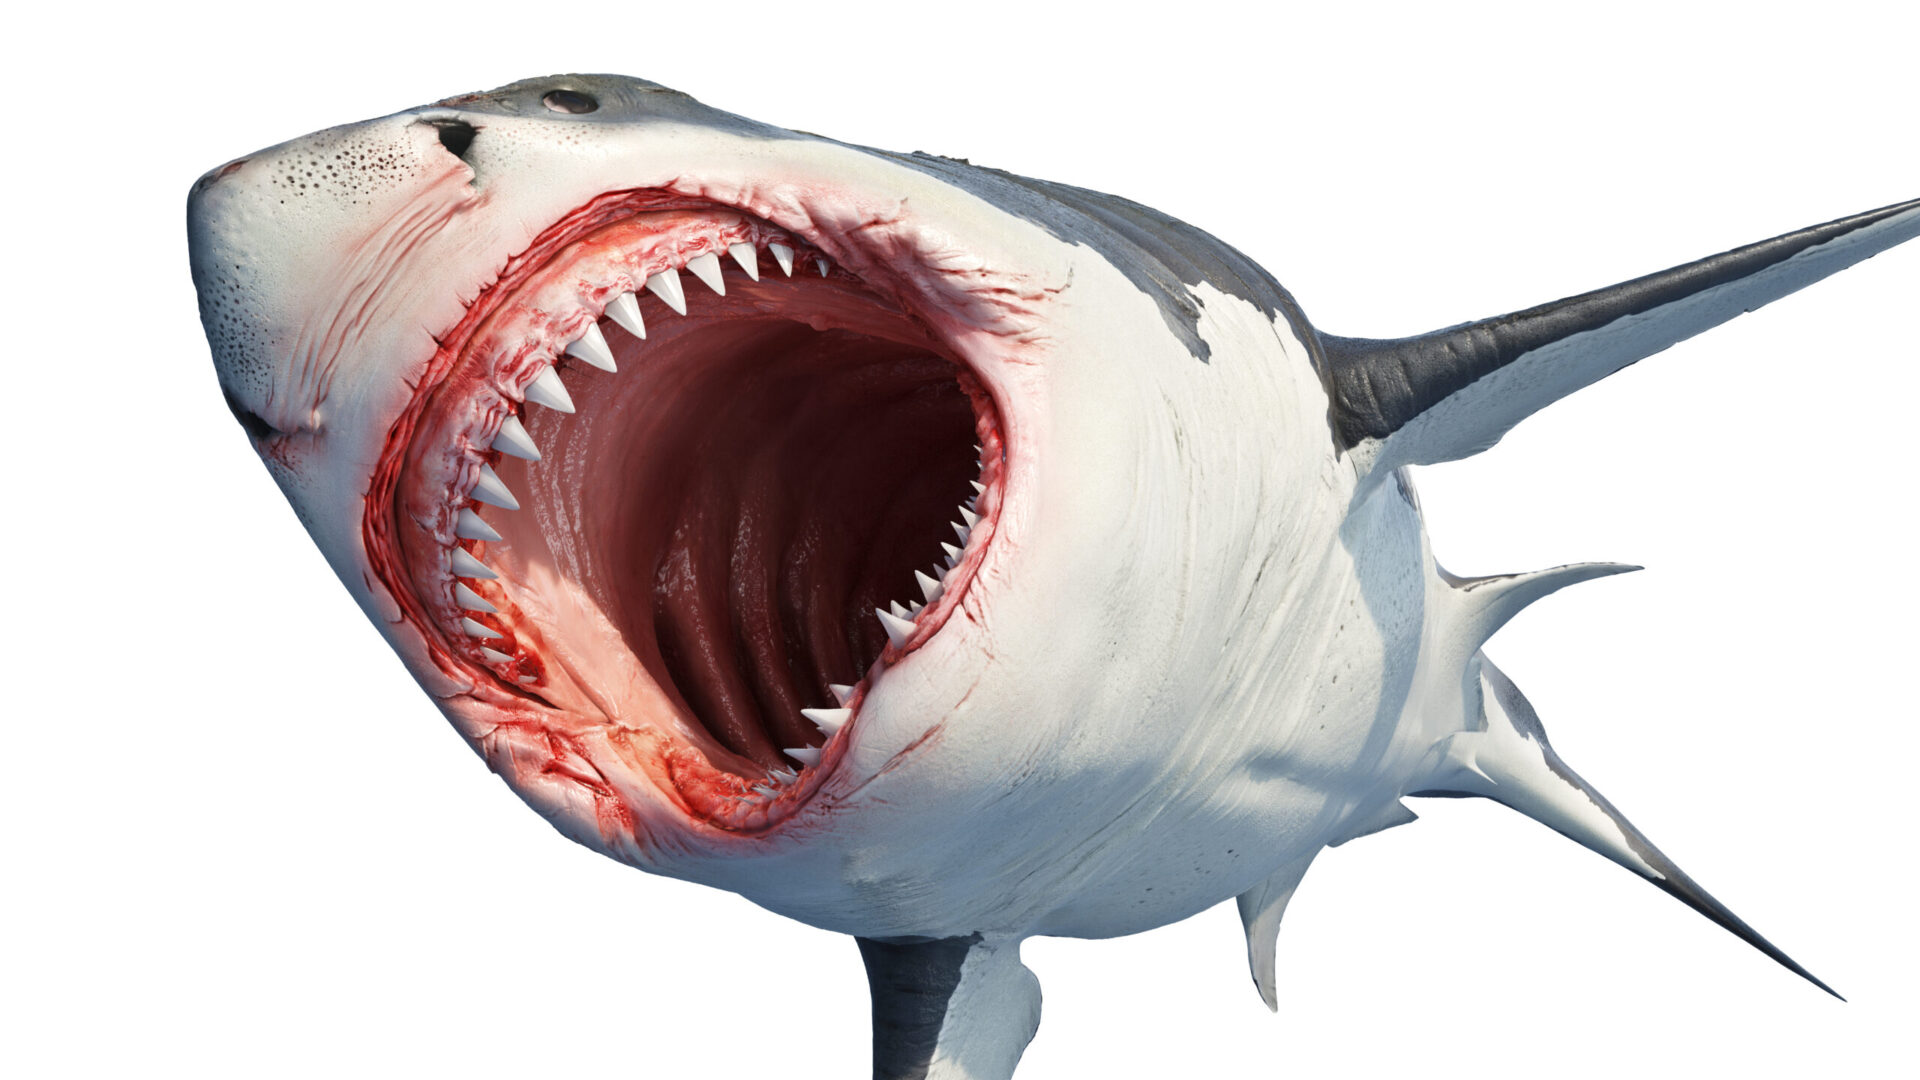 Read more about the article <a href="https://www.sciencetimesobserver.com/article/556453532-what-did-megalodon-eat-fossil-evidence-provides-shocking-clues">What Did Megalodon Eat? Fossil Evidence Provides Shocking Clues </a>